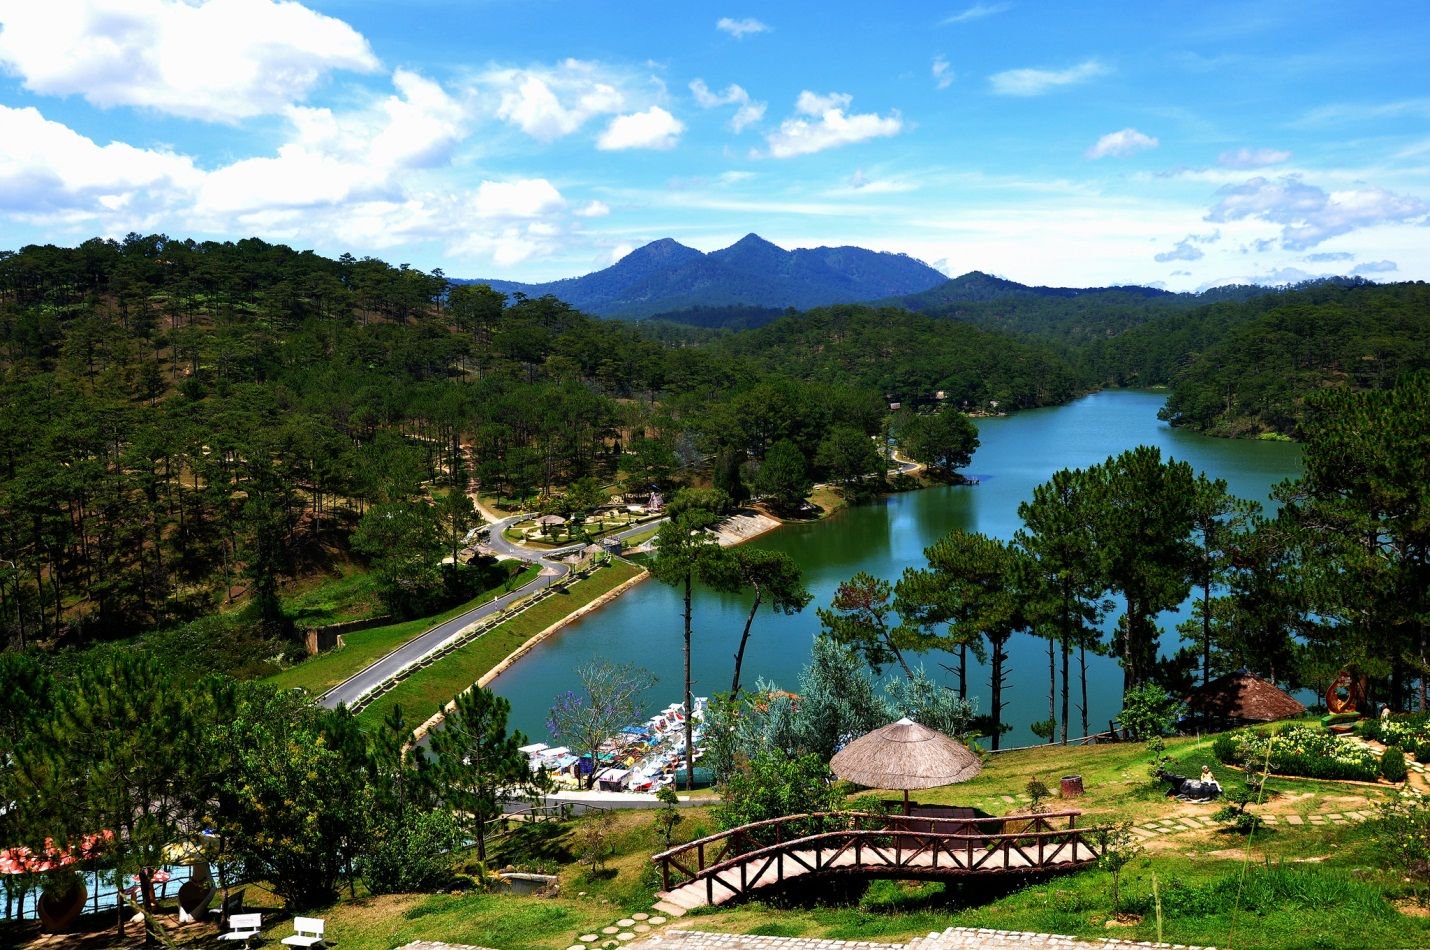 DALAT - WELCOME TO THE JUNGLE - Vietnam tour